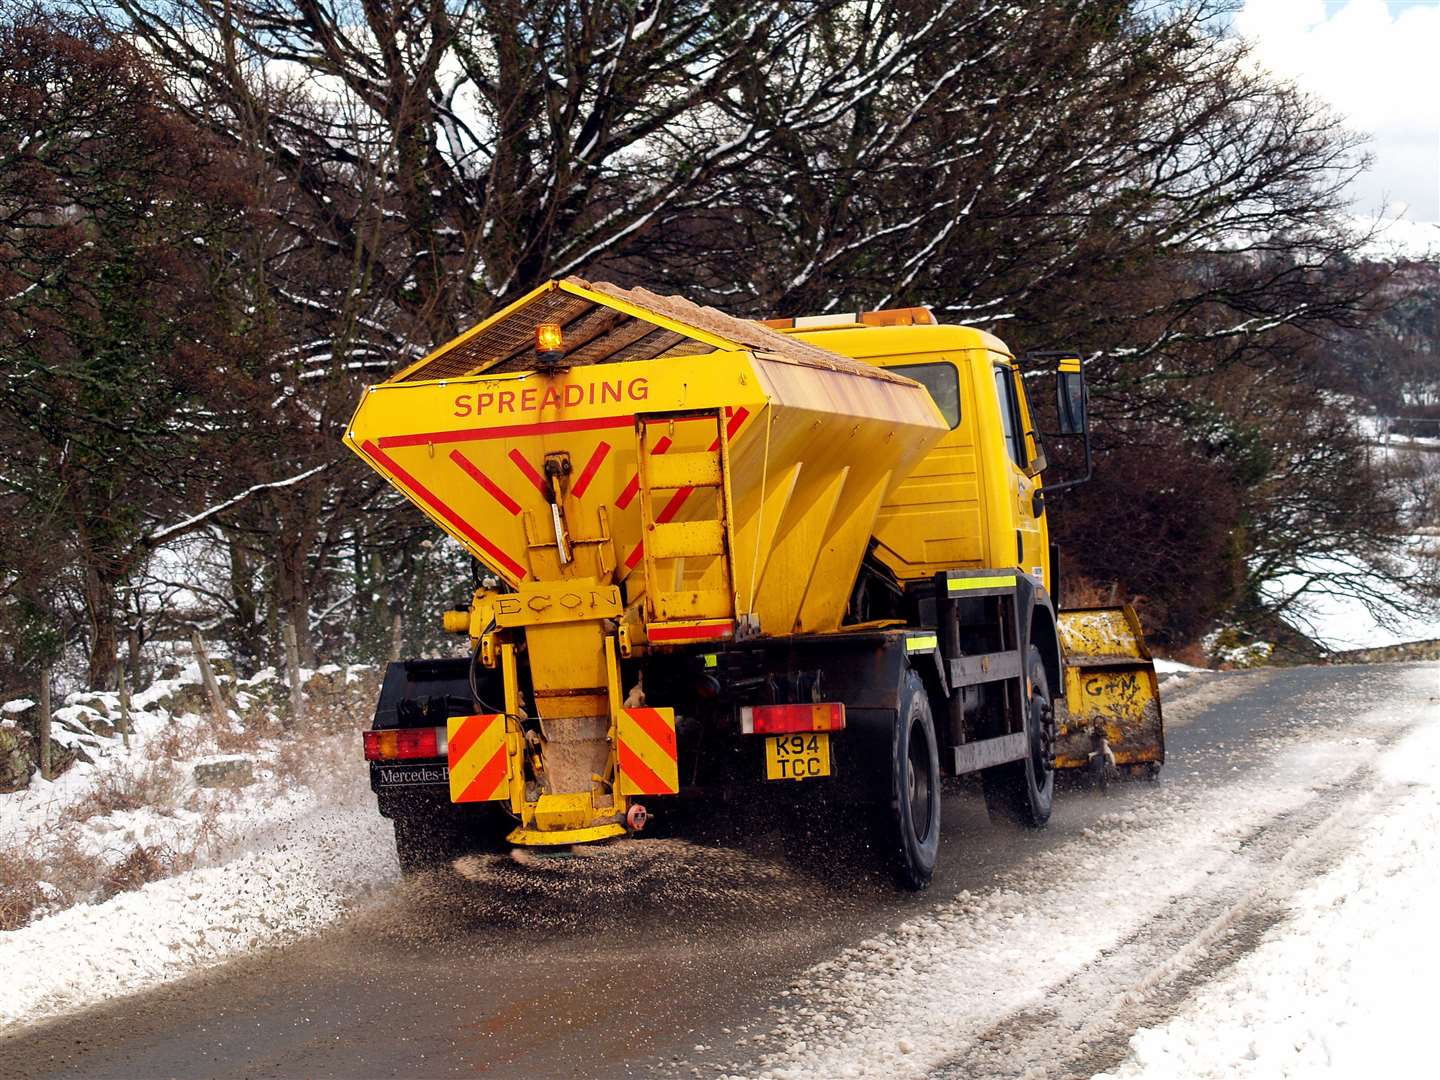 A gritter in action.